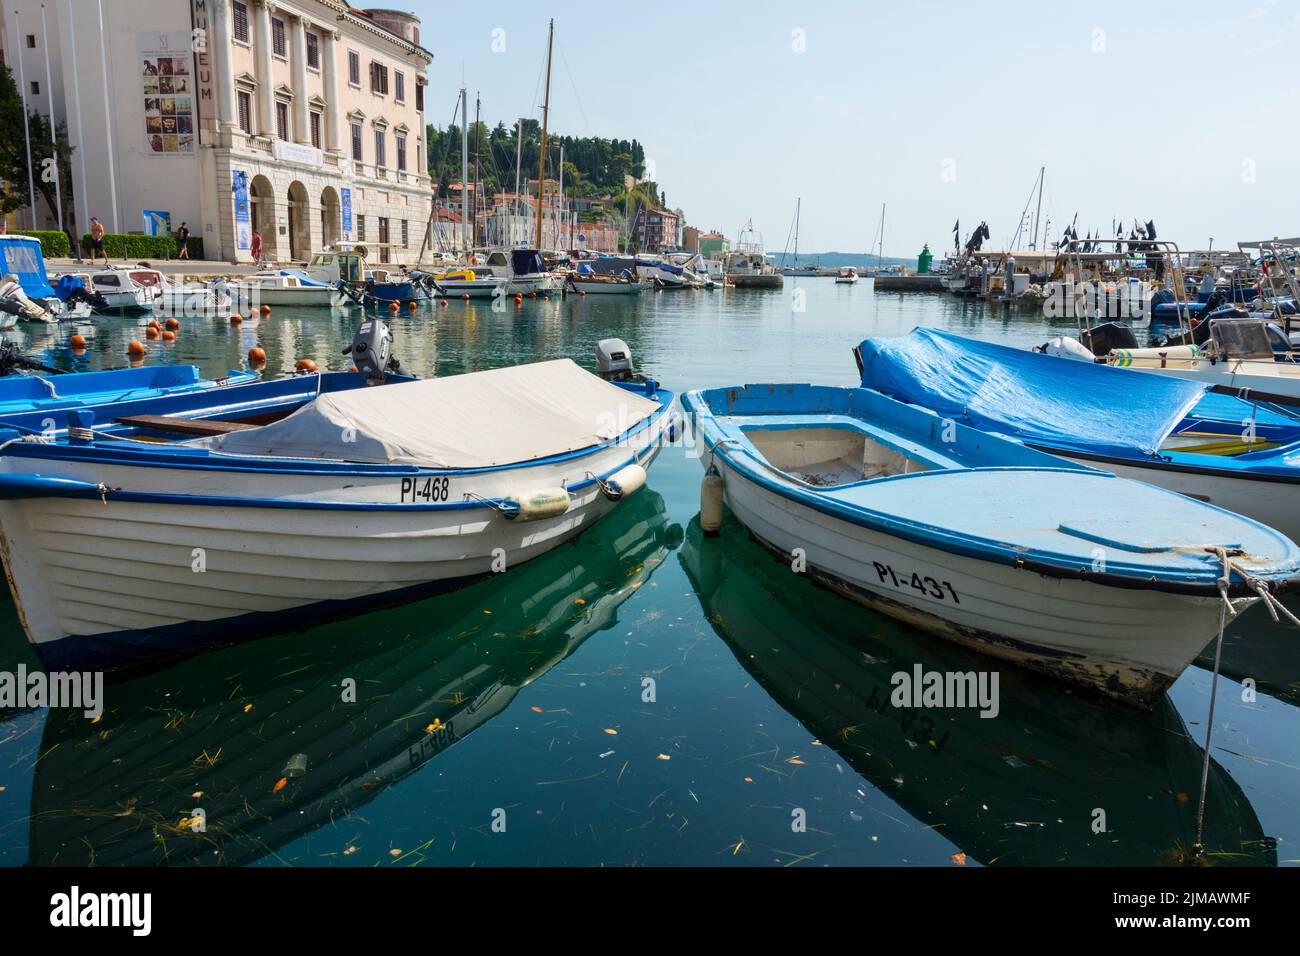 Moored boats in the marina of the historical town of Piran, Slovenia Stock Photo